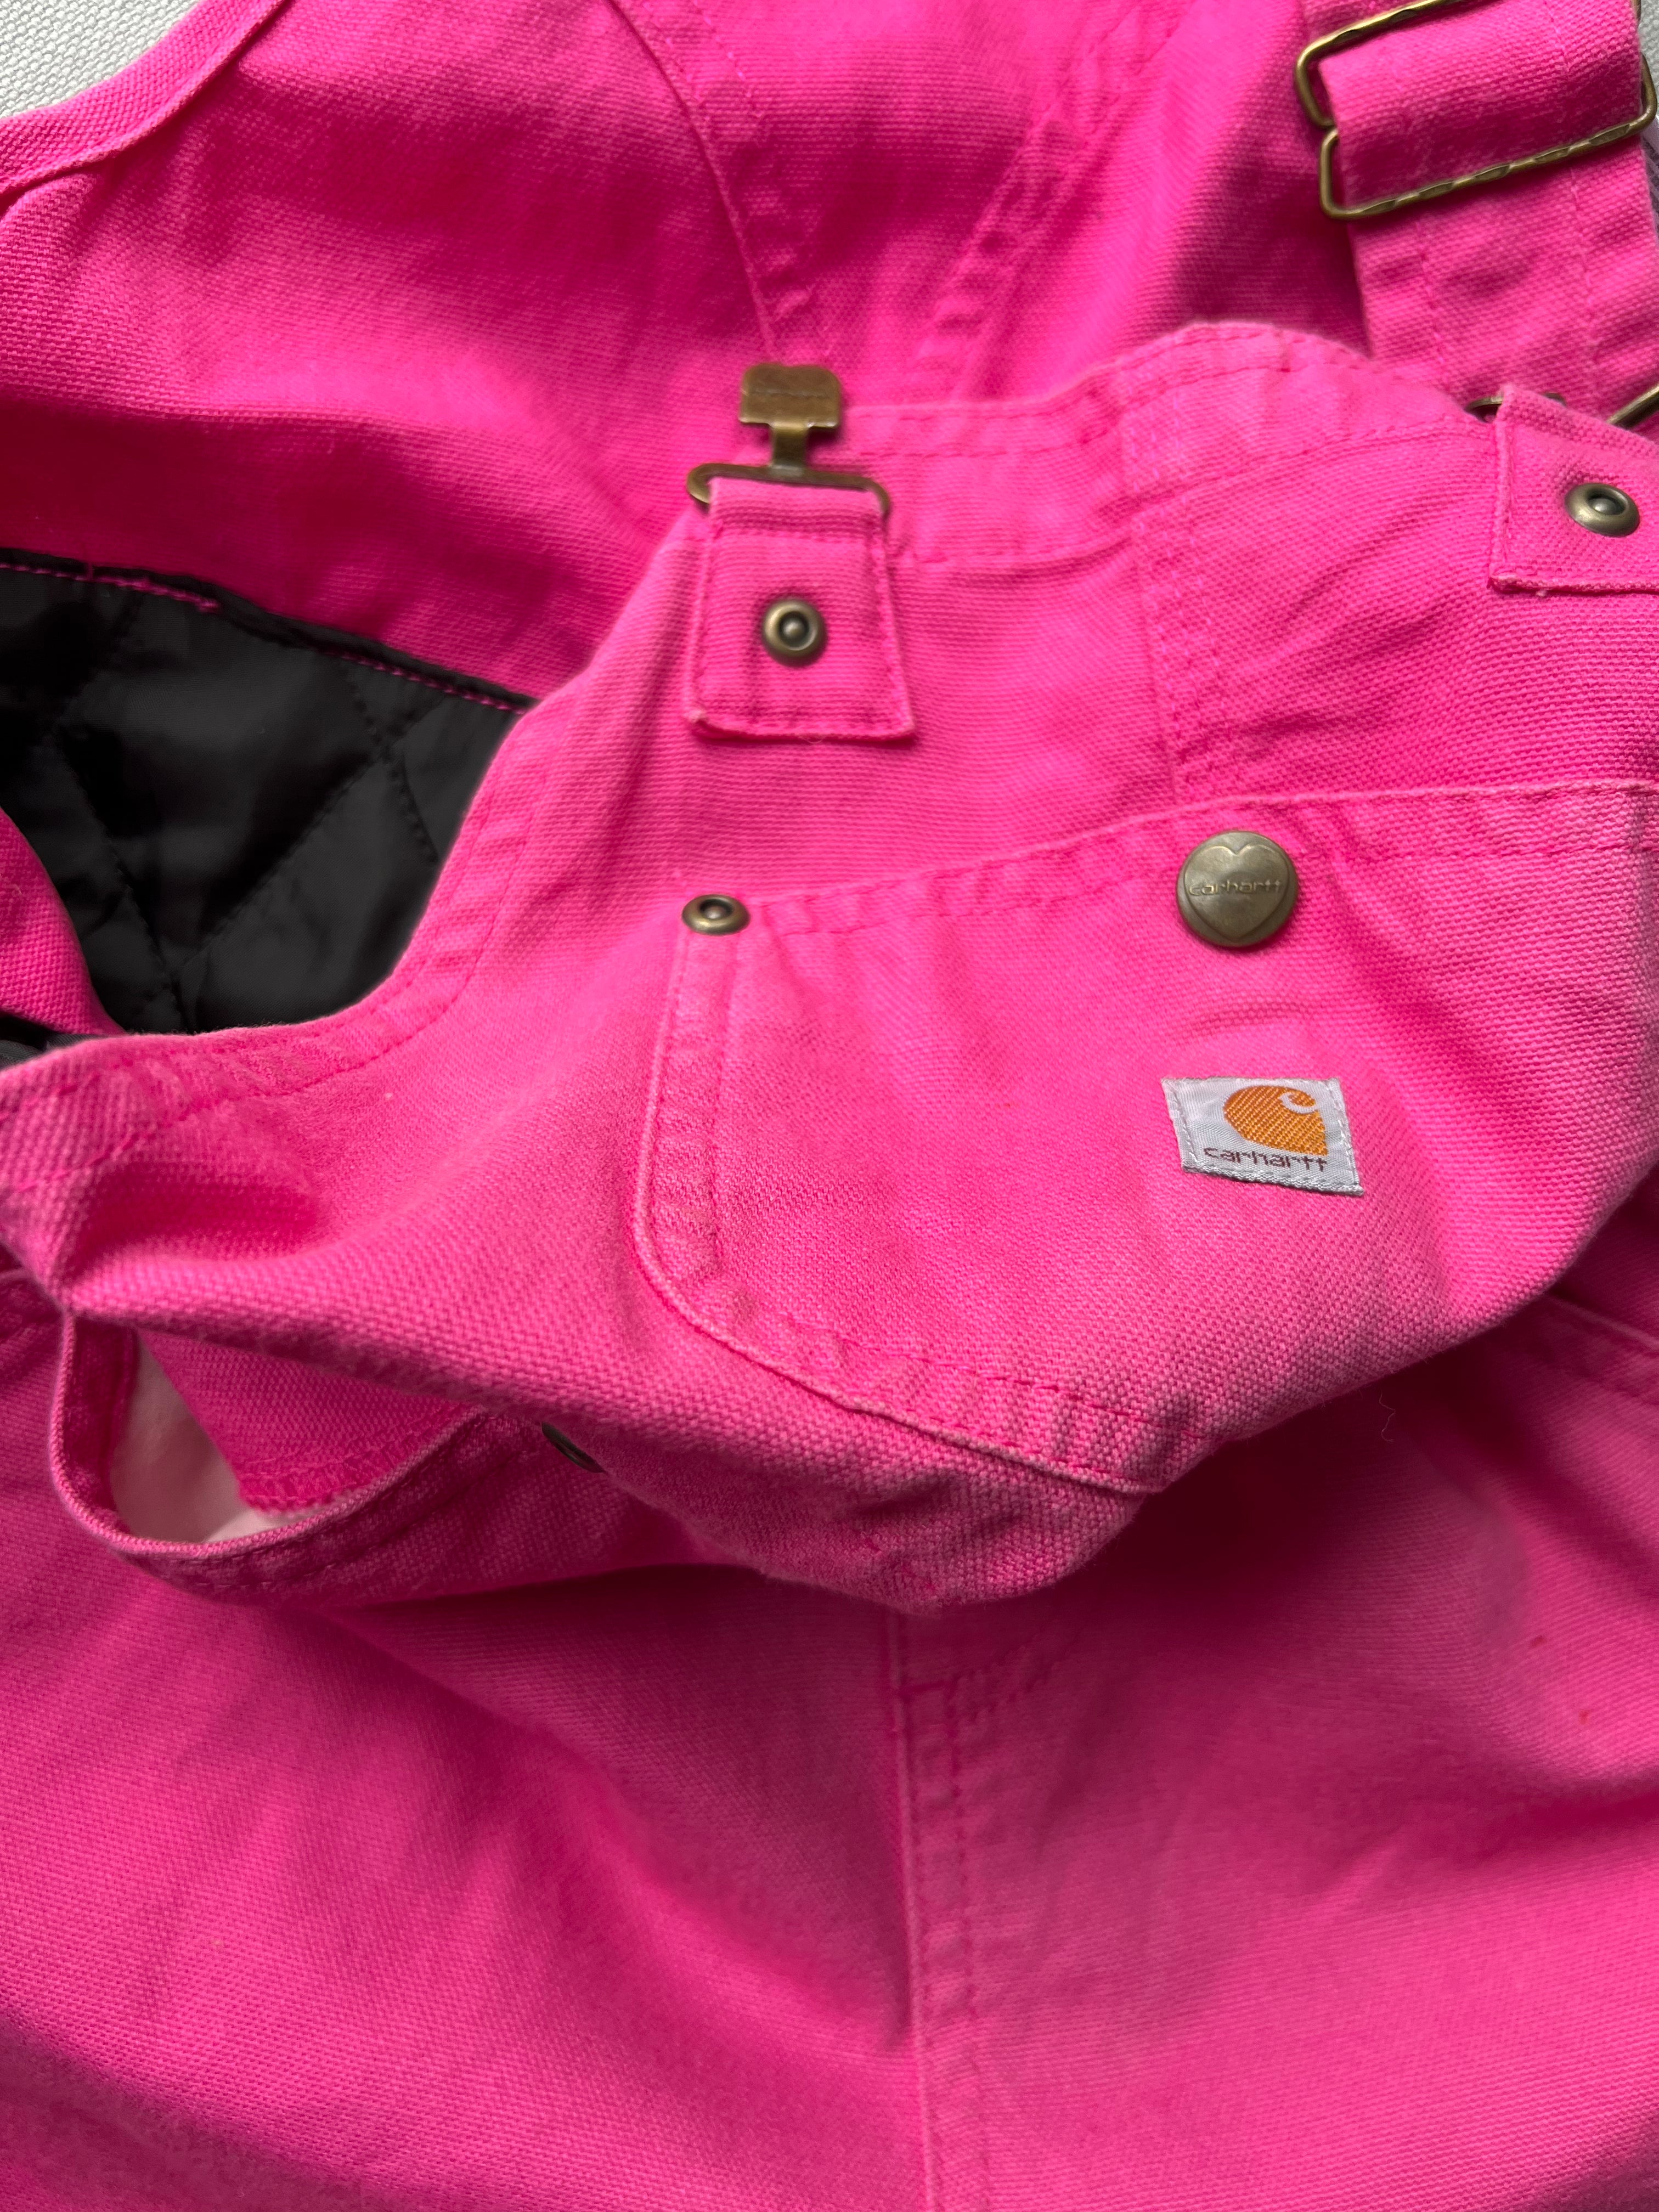 Carhartt Pink Padded Overalls Age 5